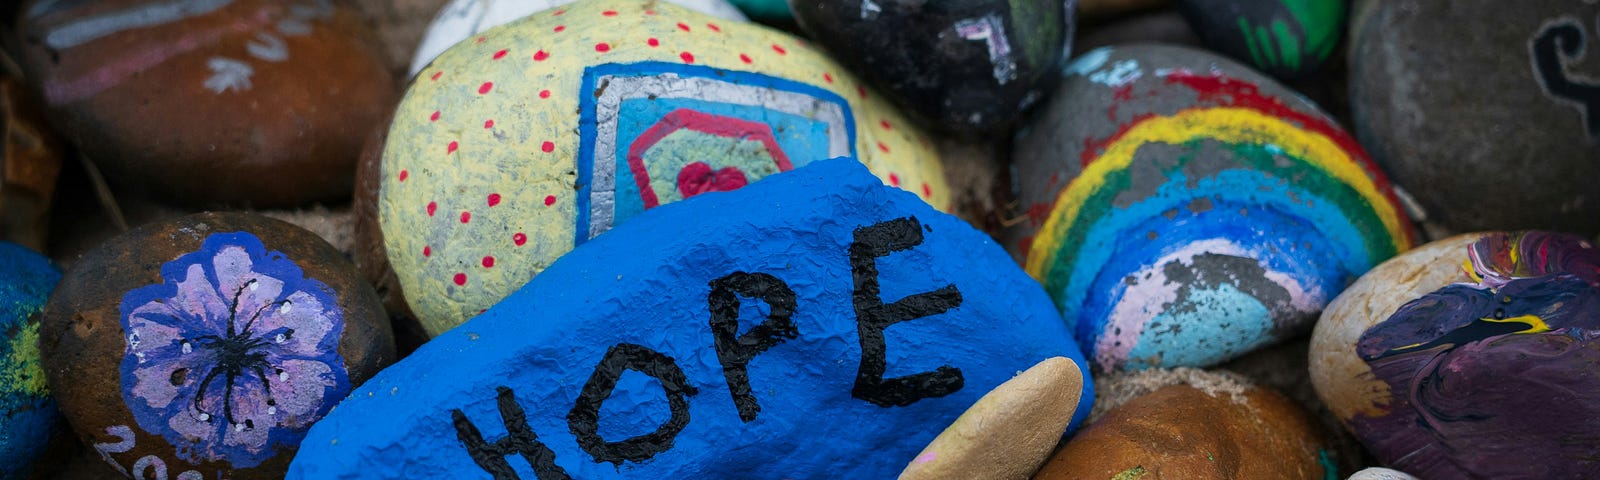 A variety of painted rocks with the focus being on a blue rock in the middle with black letters spelling HOPE.